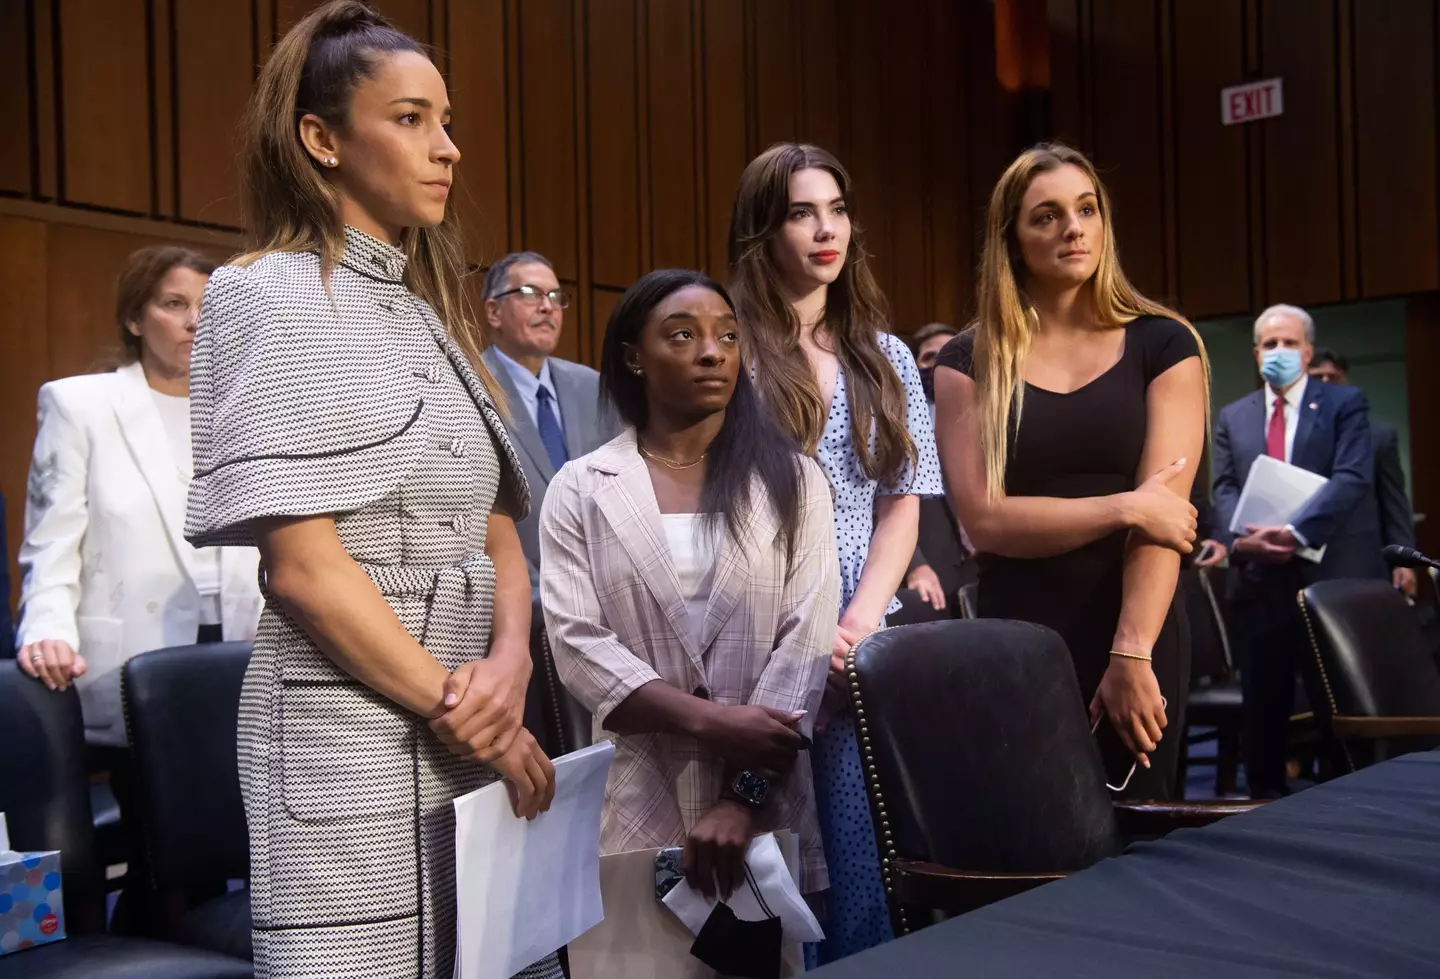 US Olympic gymnasts Aly Raisman, Simone Biles, McKayla Maroney and Maggie Nichols in court for the Nassar hearing.